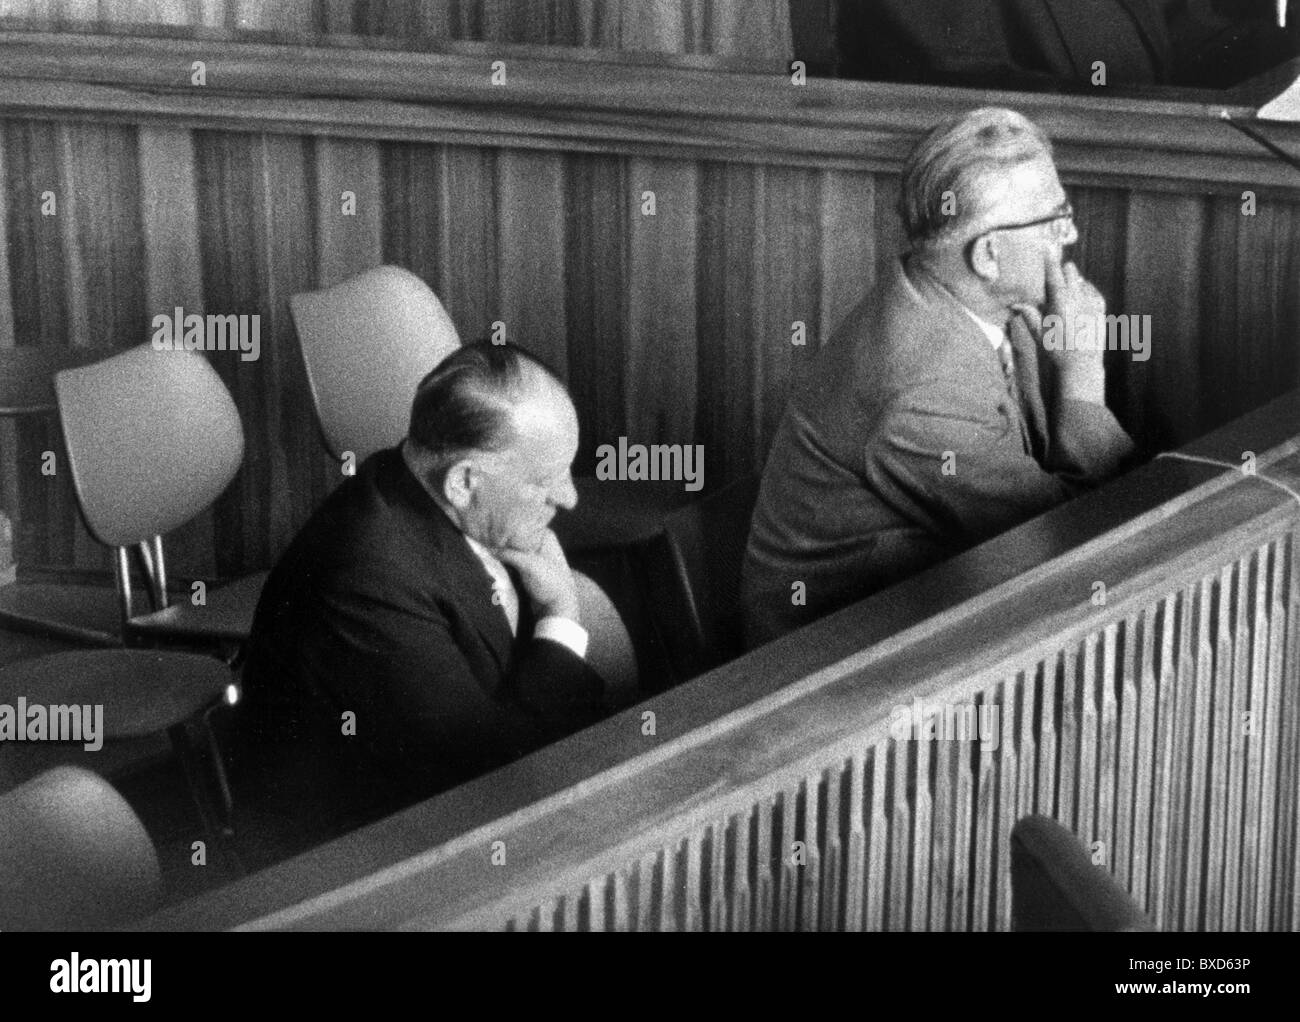 justice, trials, Roehm Trial, Munich, May 1957, the defendants Josef 'Sepp' Dietrich and Michael Lippert during the pronouncement of the sentence, 14.5.1957, Additional-Rights-Clearences-Not Available Stock Photo